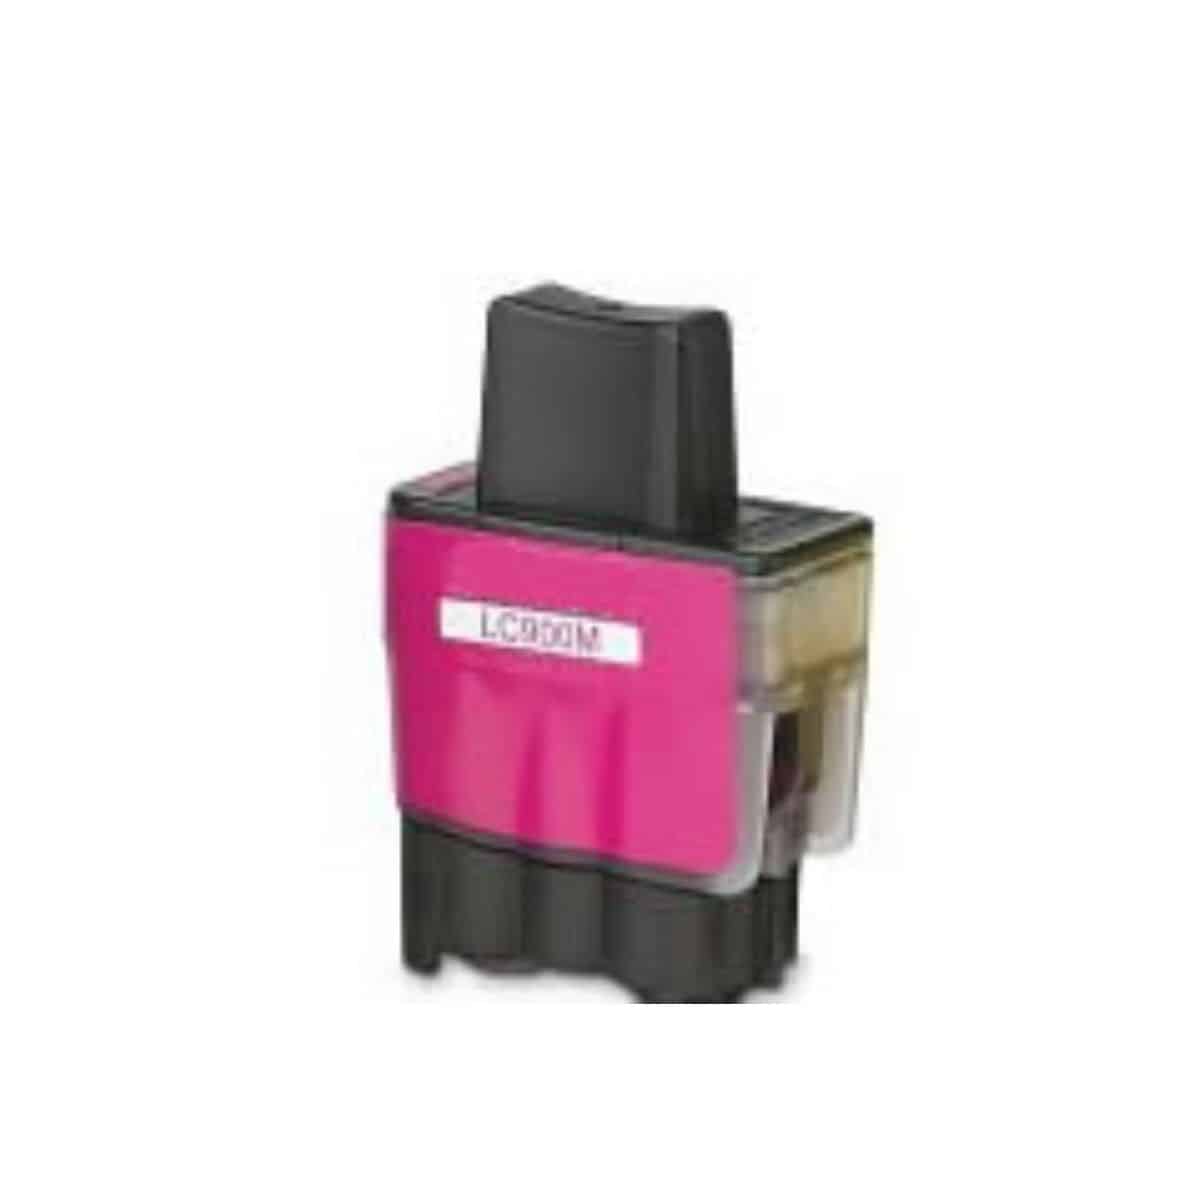 LC-900 M Cartouche d'encre compatible Brother - Magenta